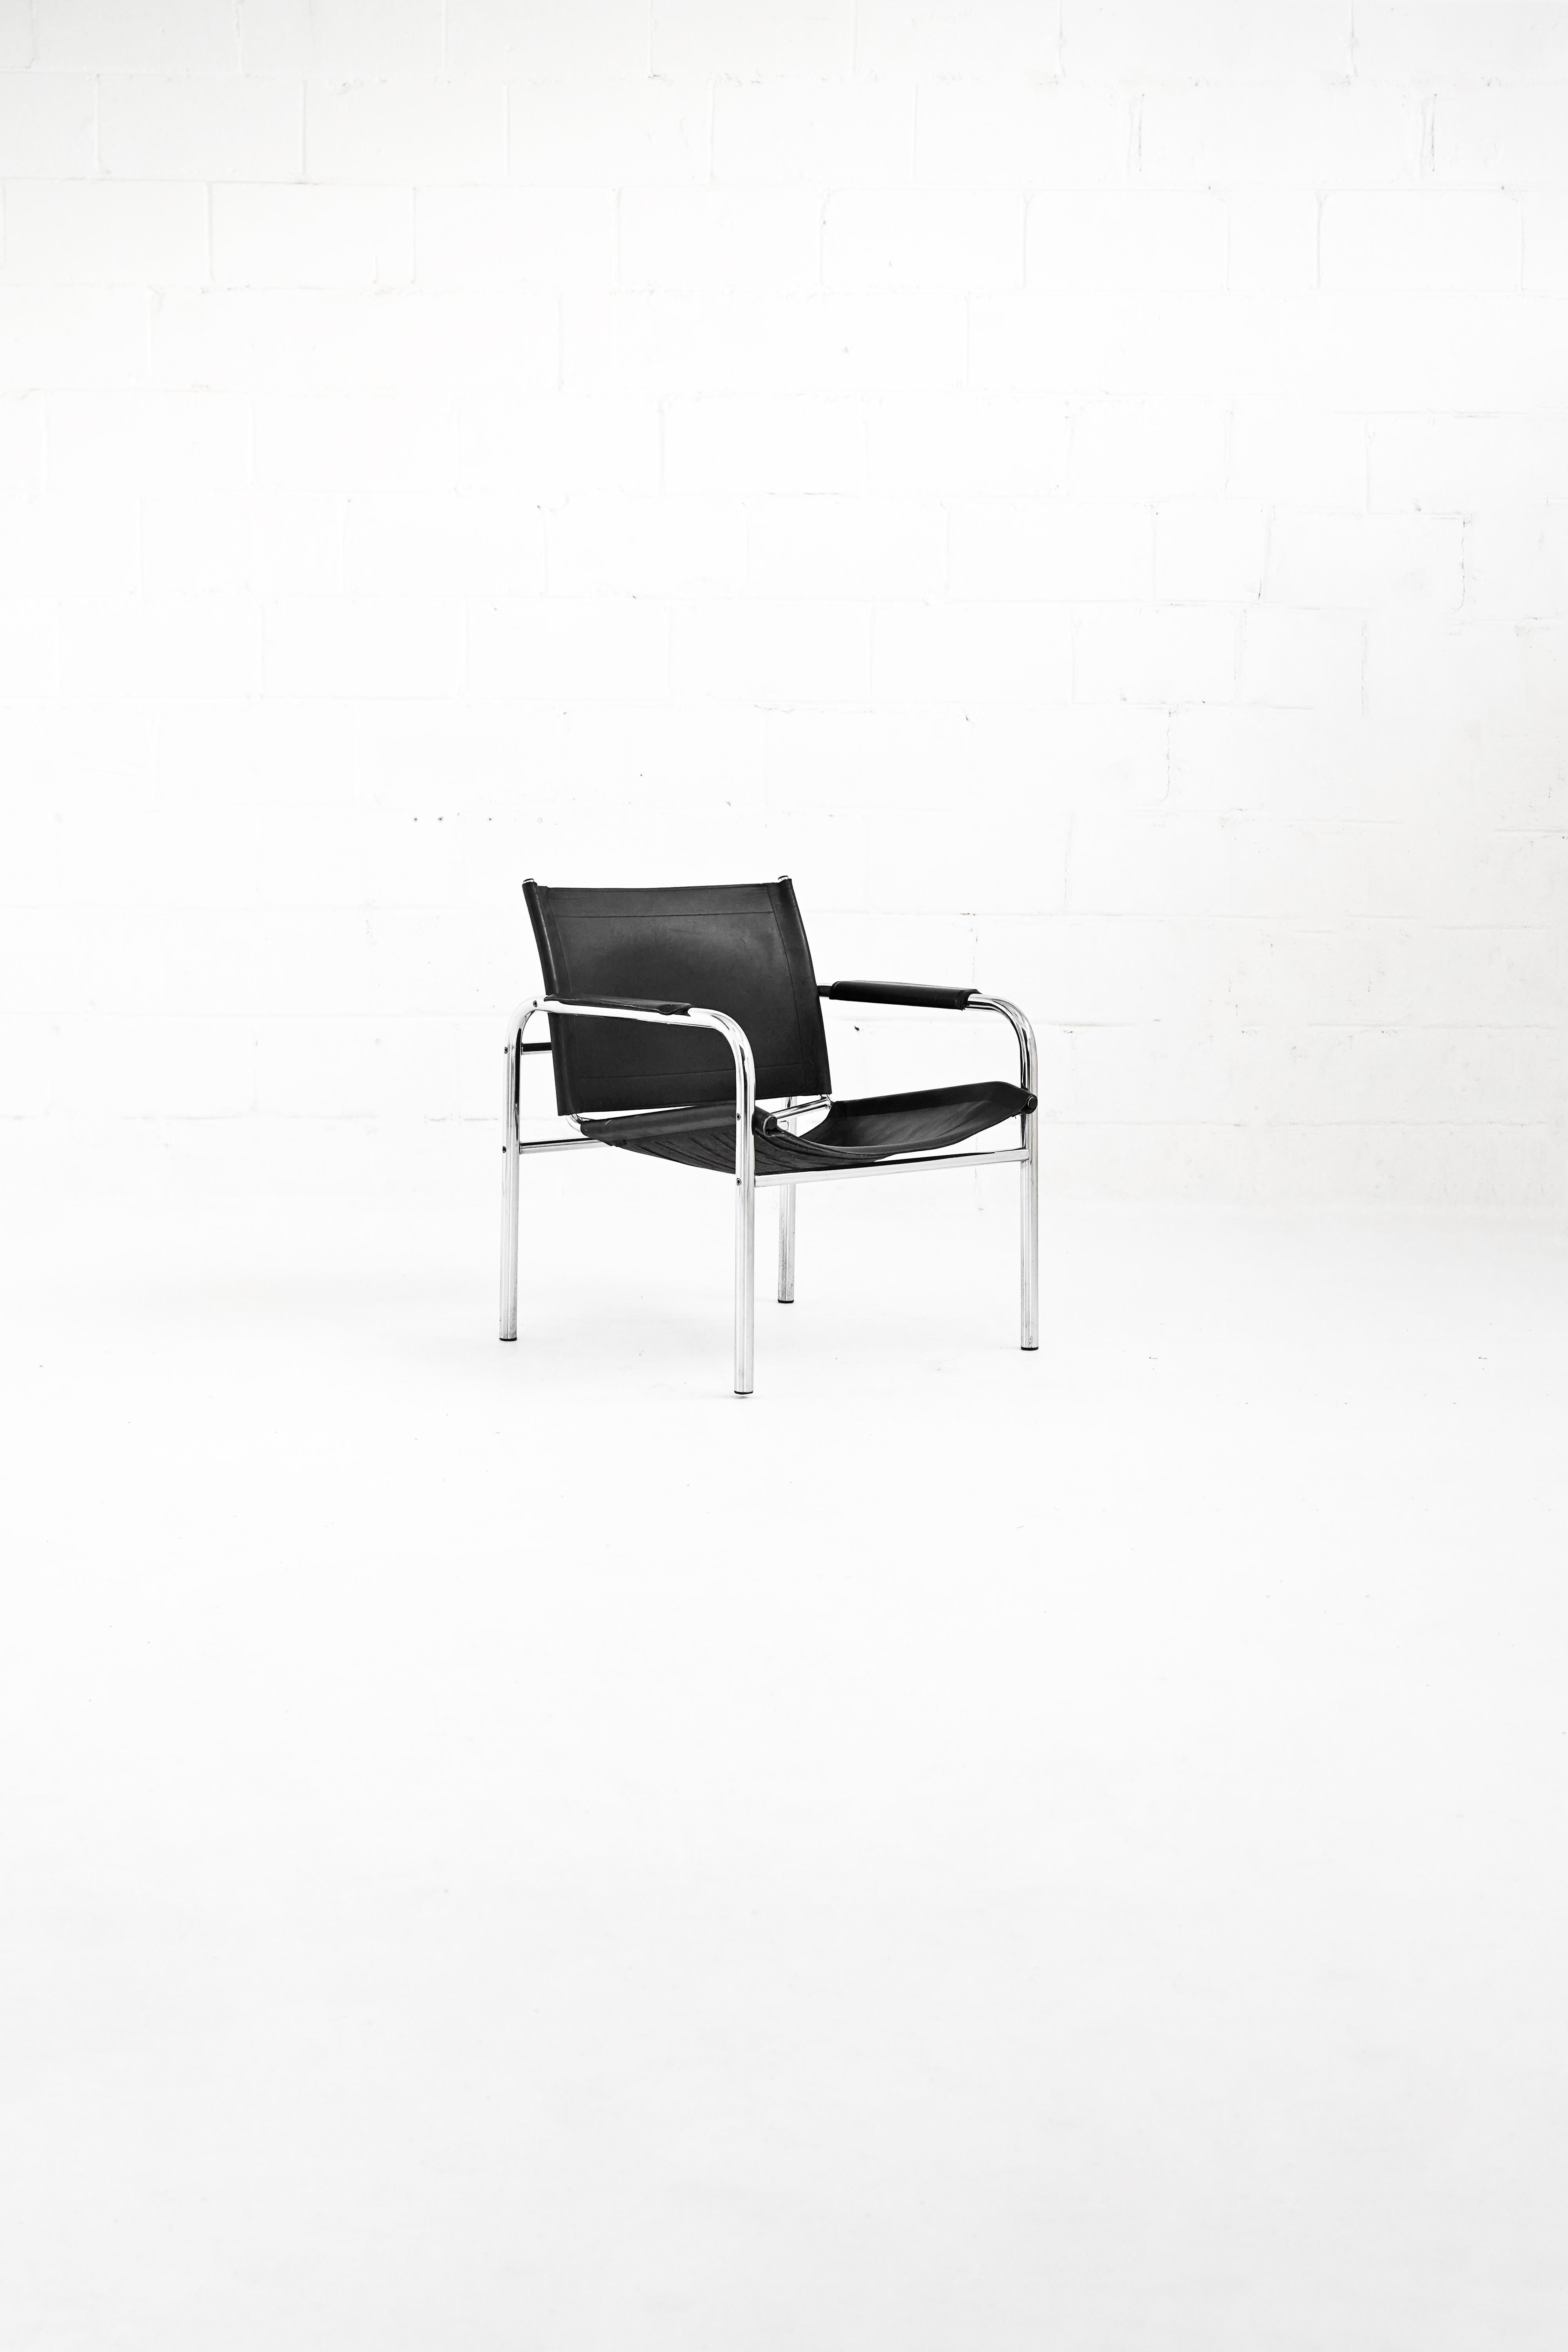 Chrome and Leather Klinte Easy Chair by Tord Björklund for IKEA 1